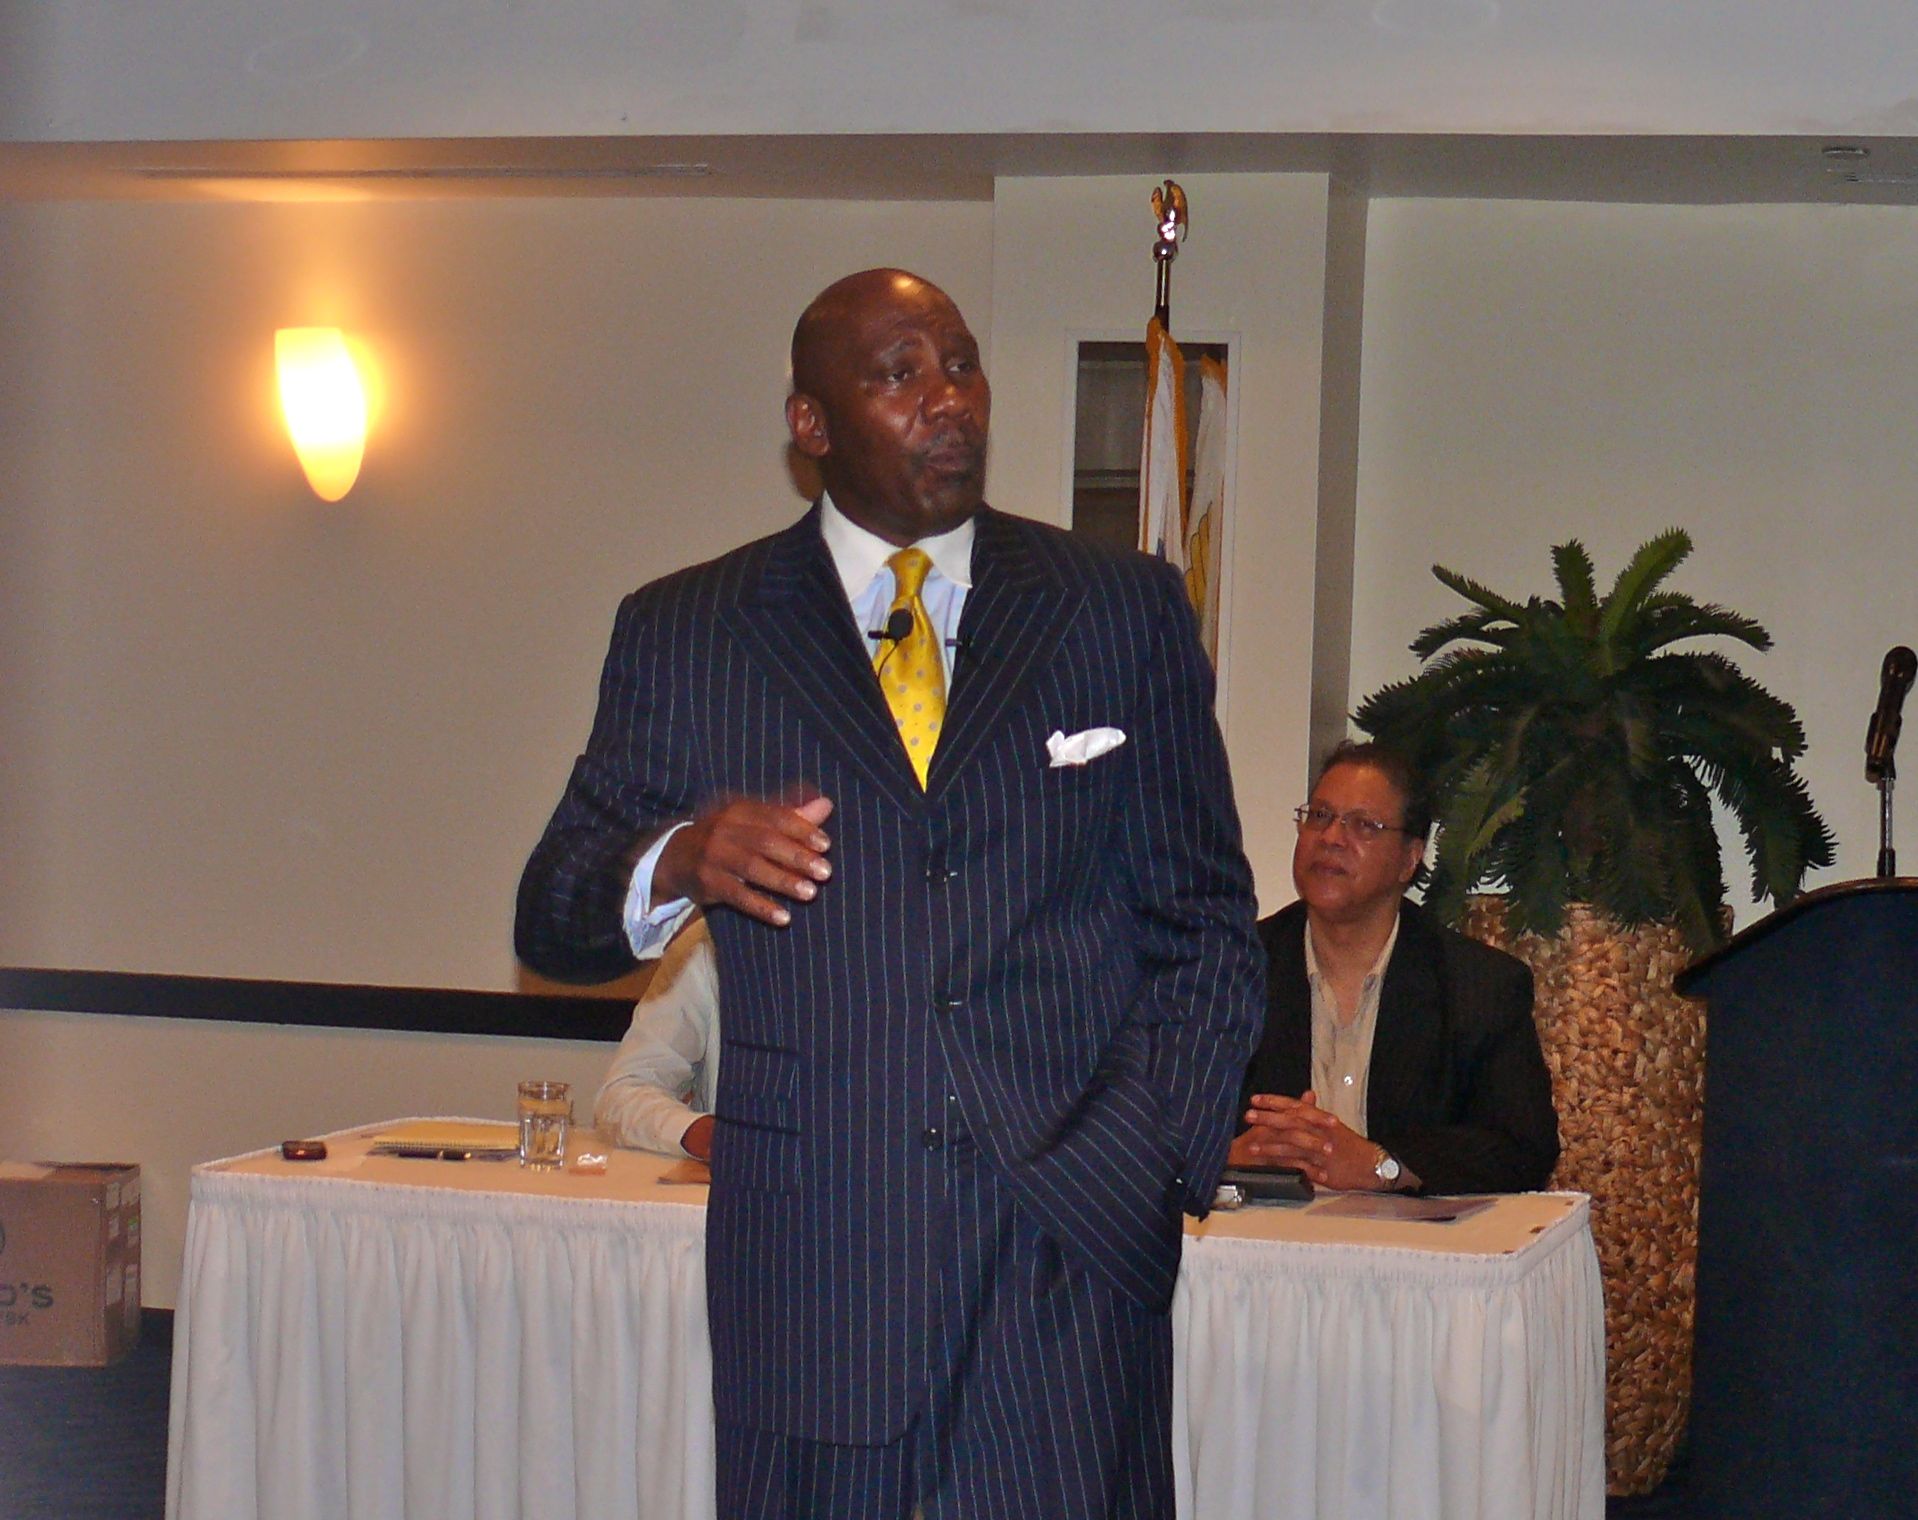 Motivational speaker Columbus Copeland looked to inspire laid-off workers during Monday's event at Divi Carina Bay Resort.